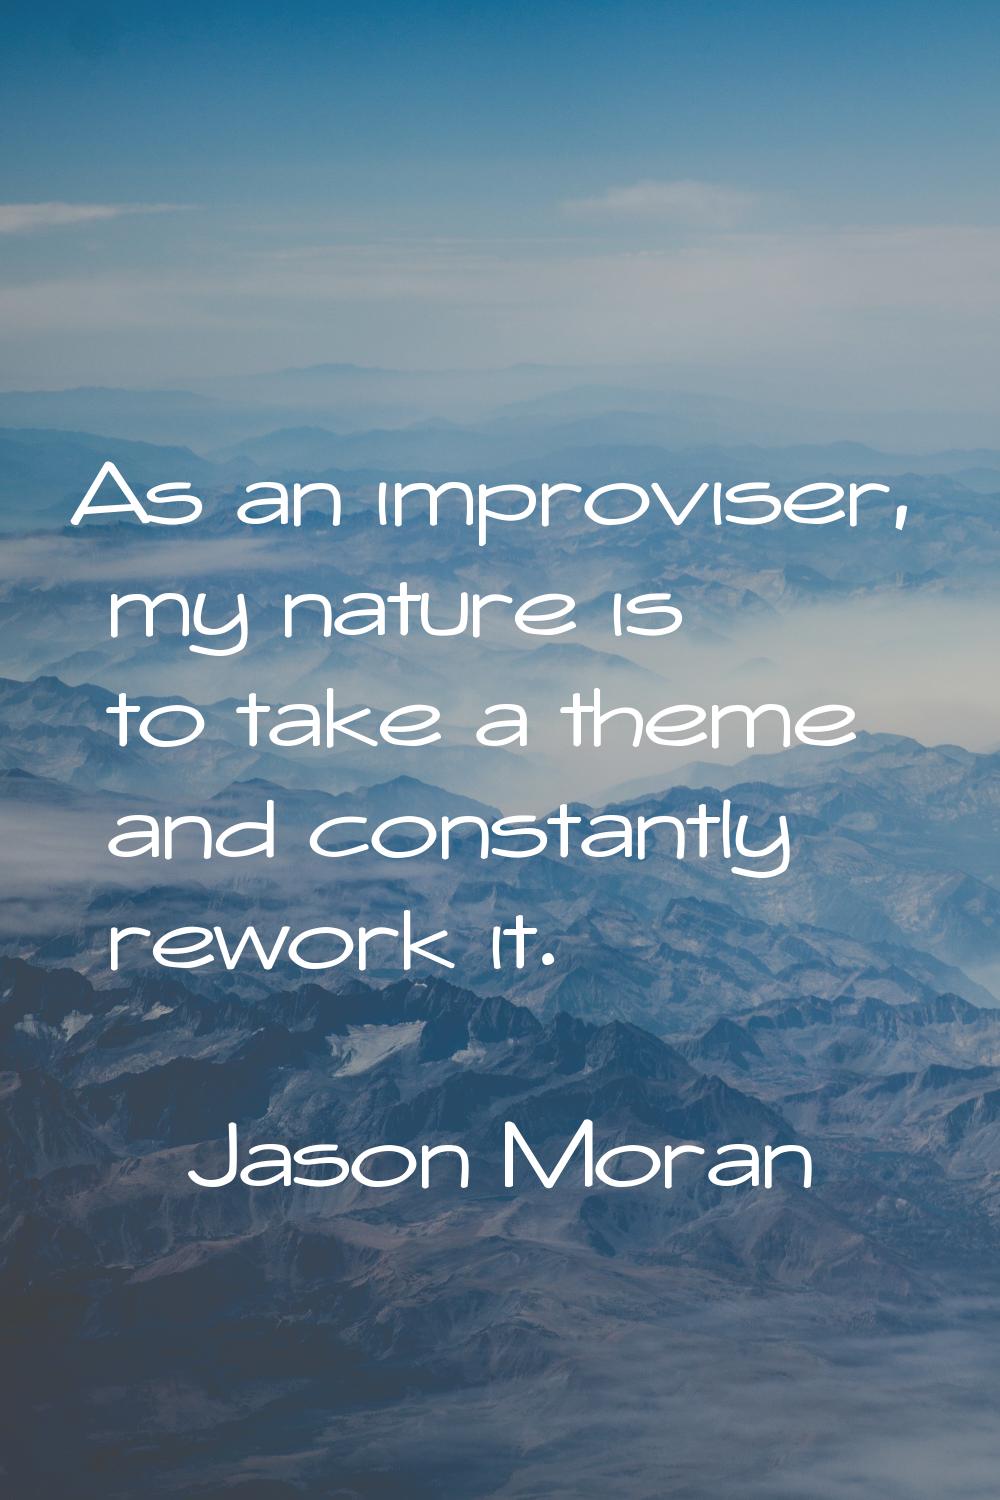 As an improviser, my nature is to take a theme and constantly rework it.